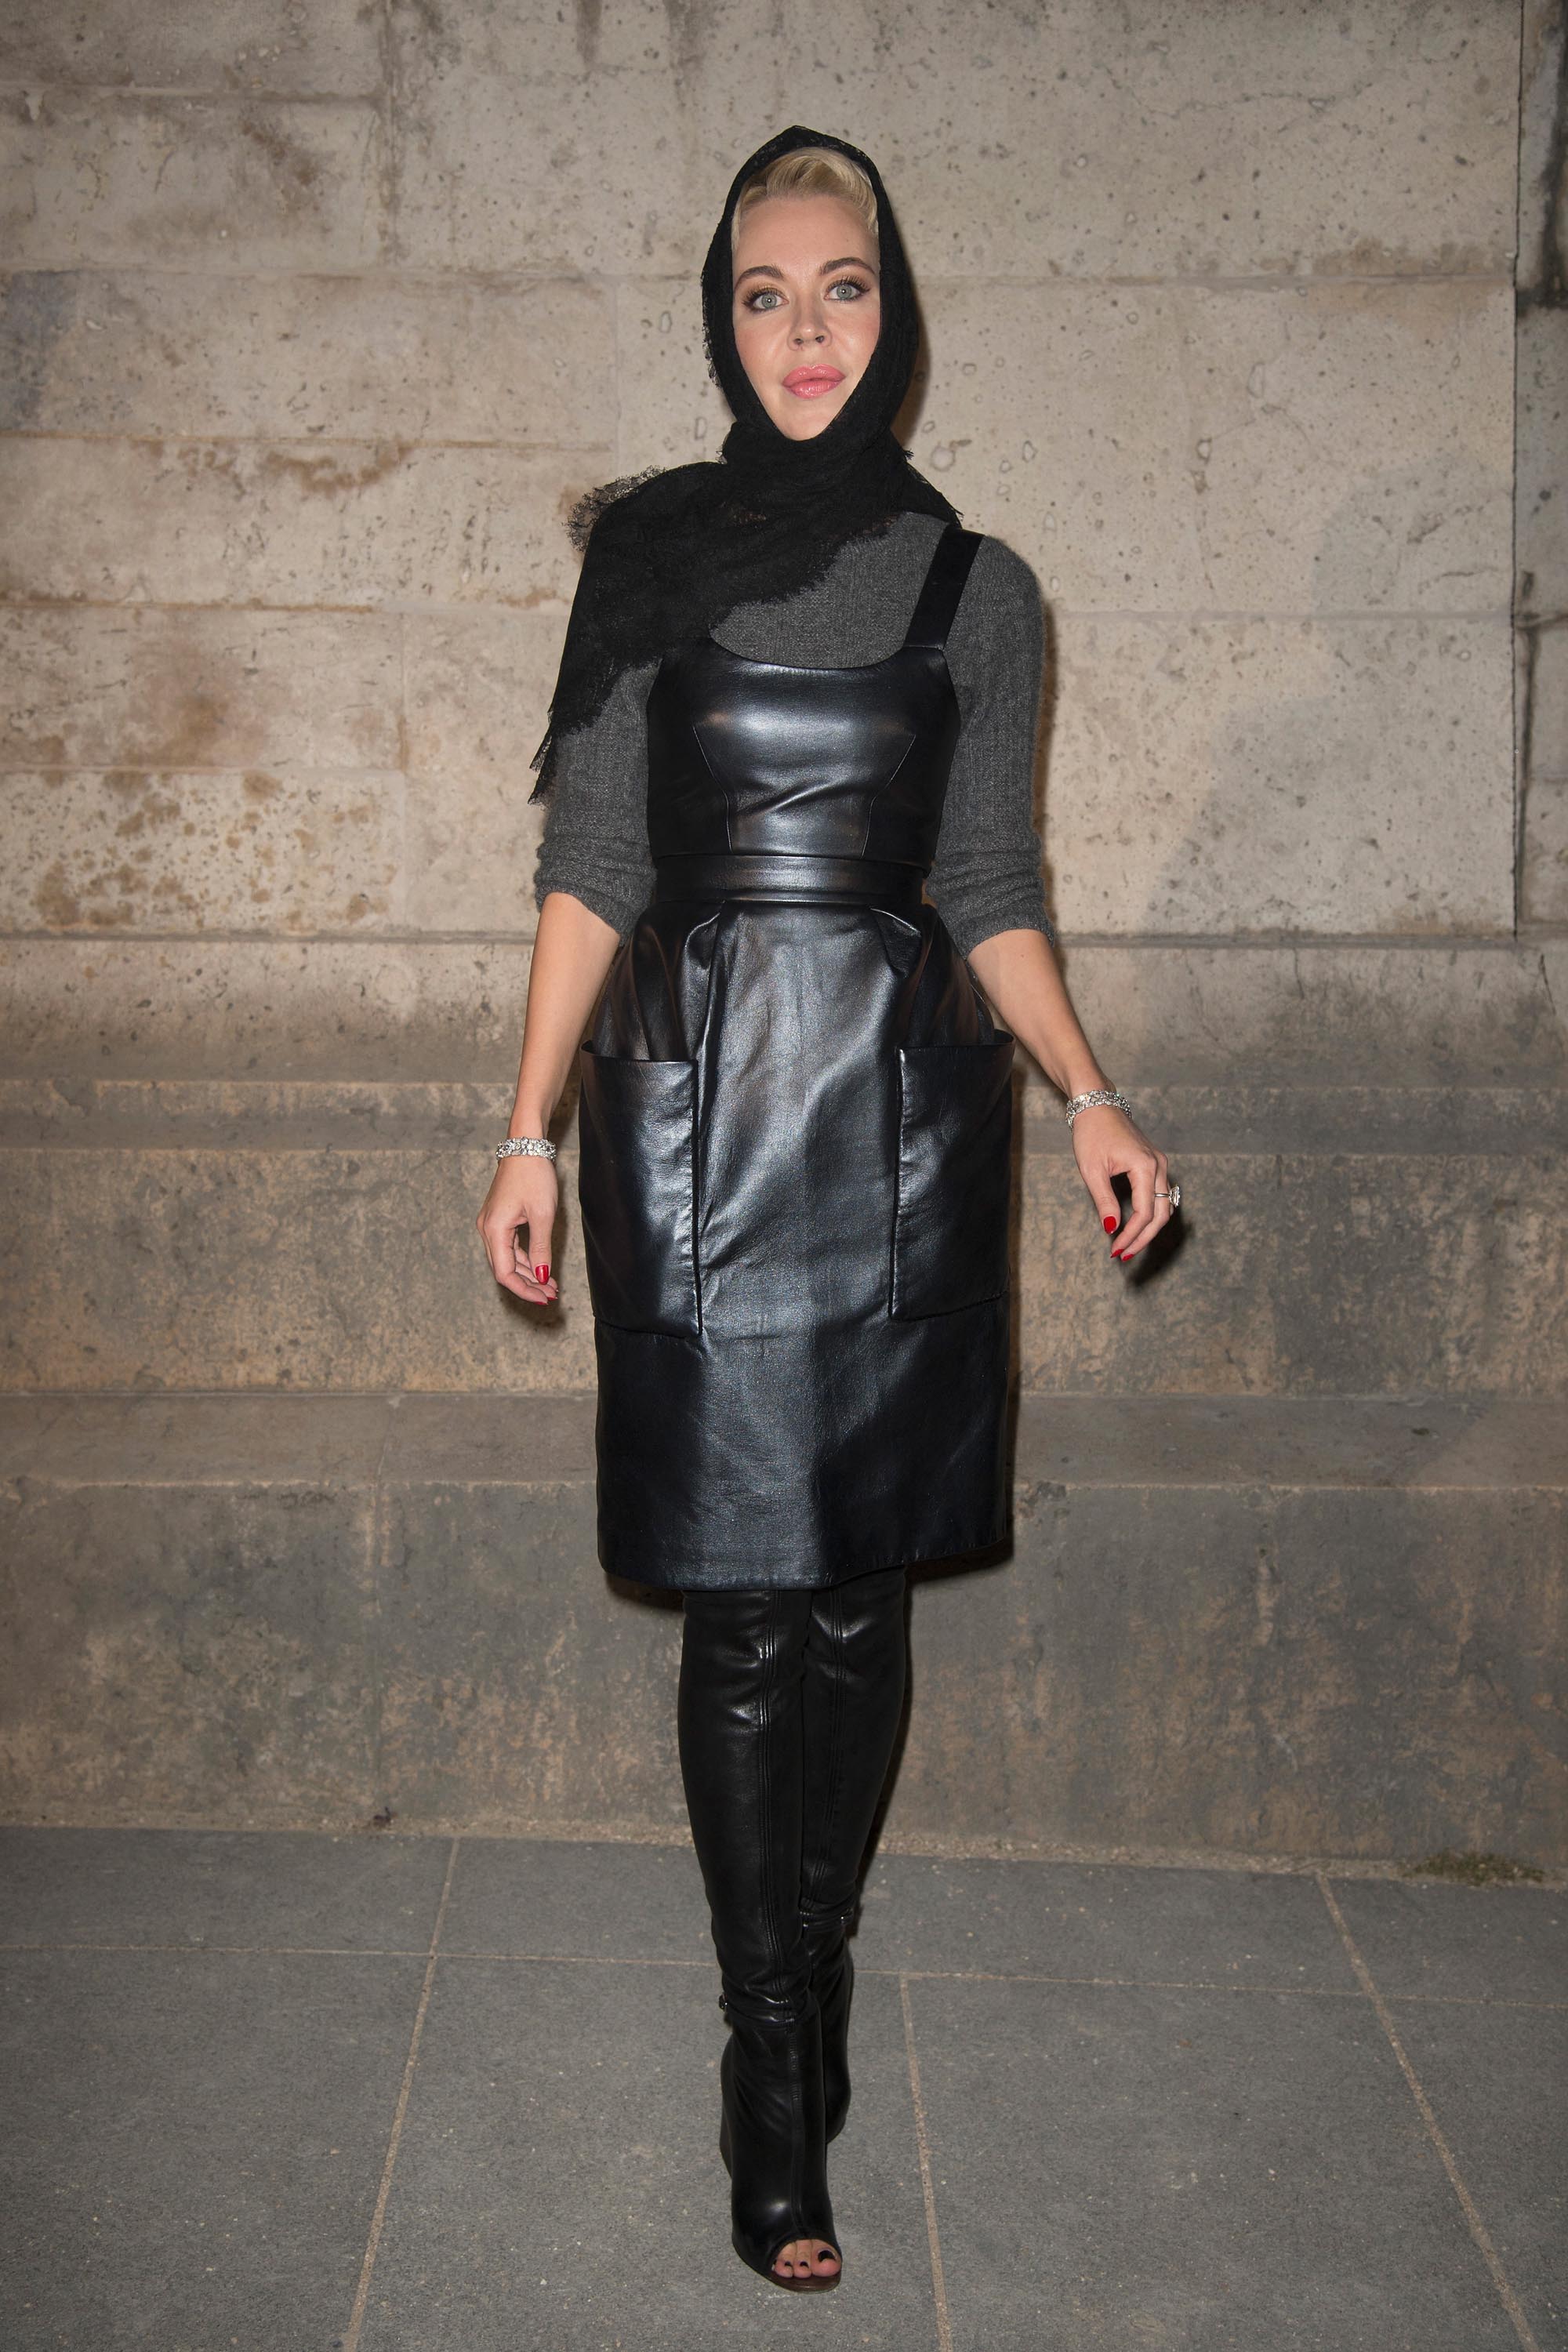 Ulyana Sergeenko attend the Givenchy show